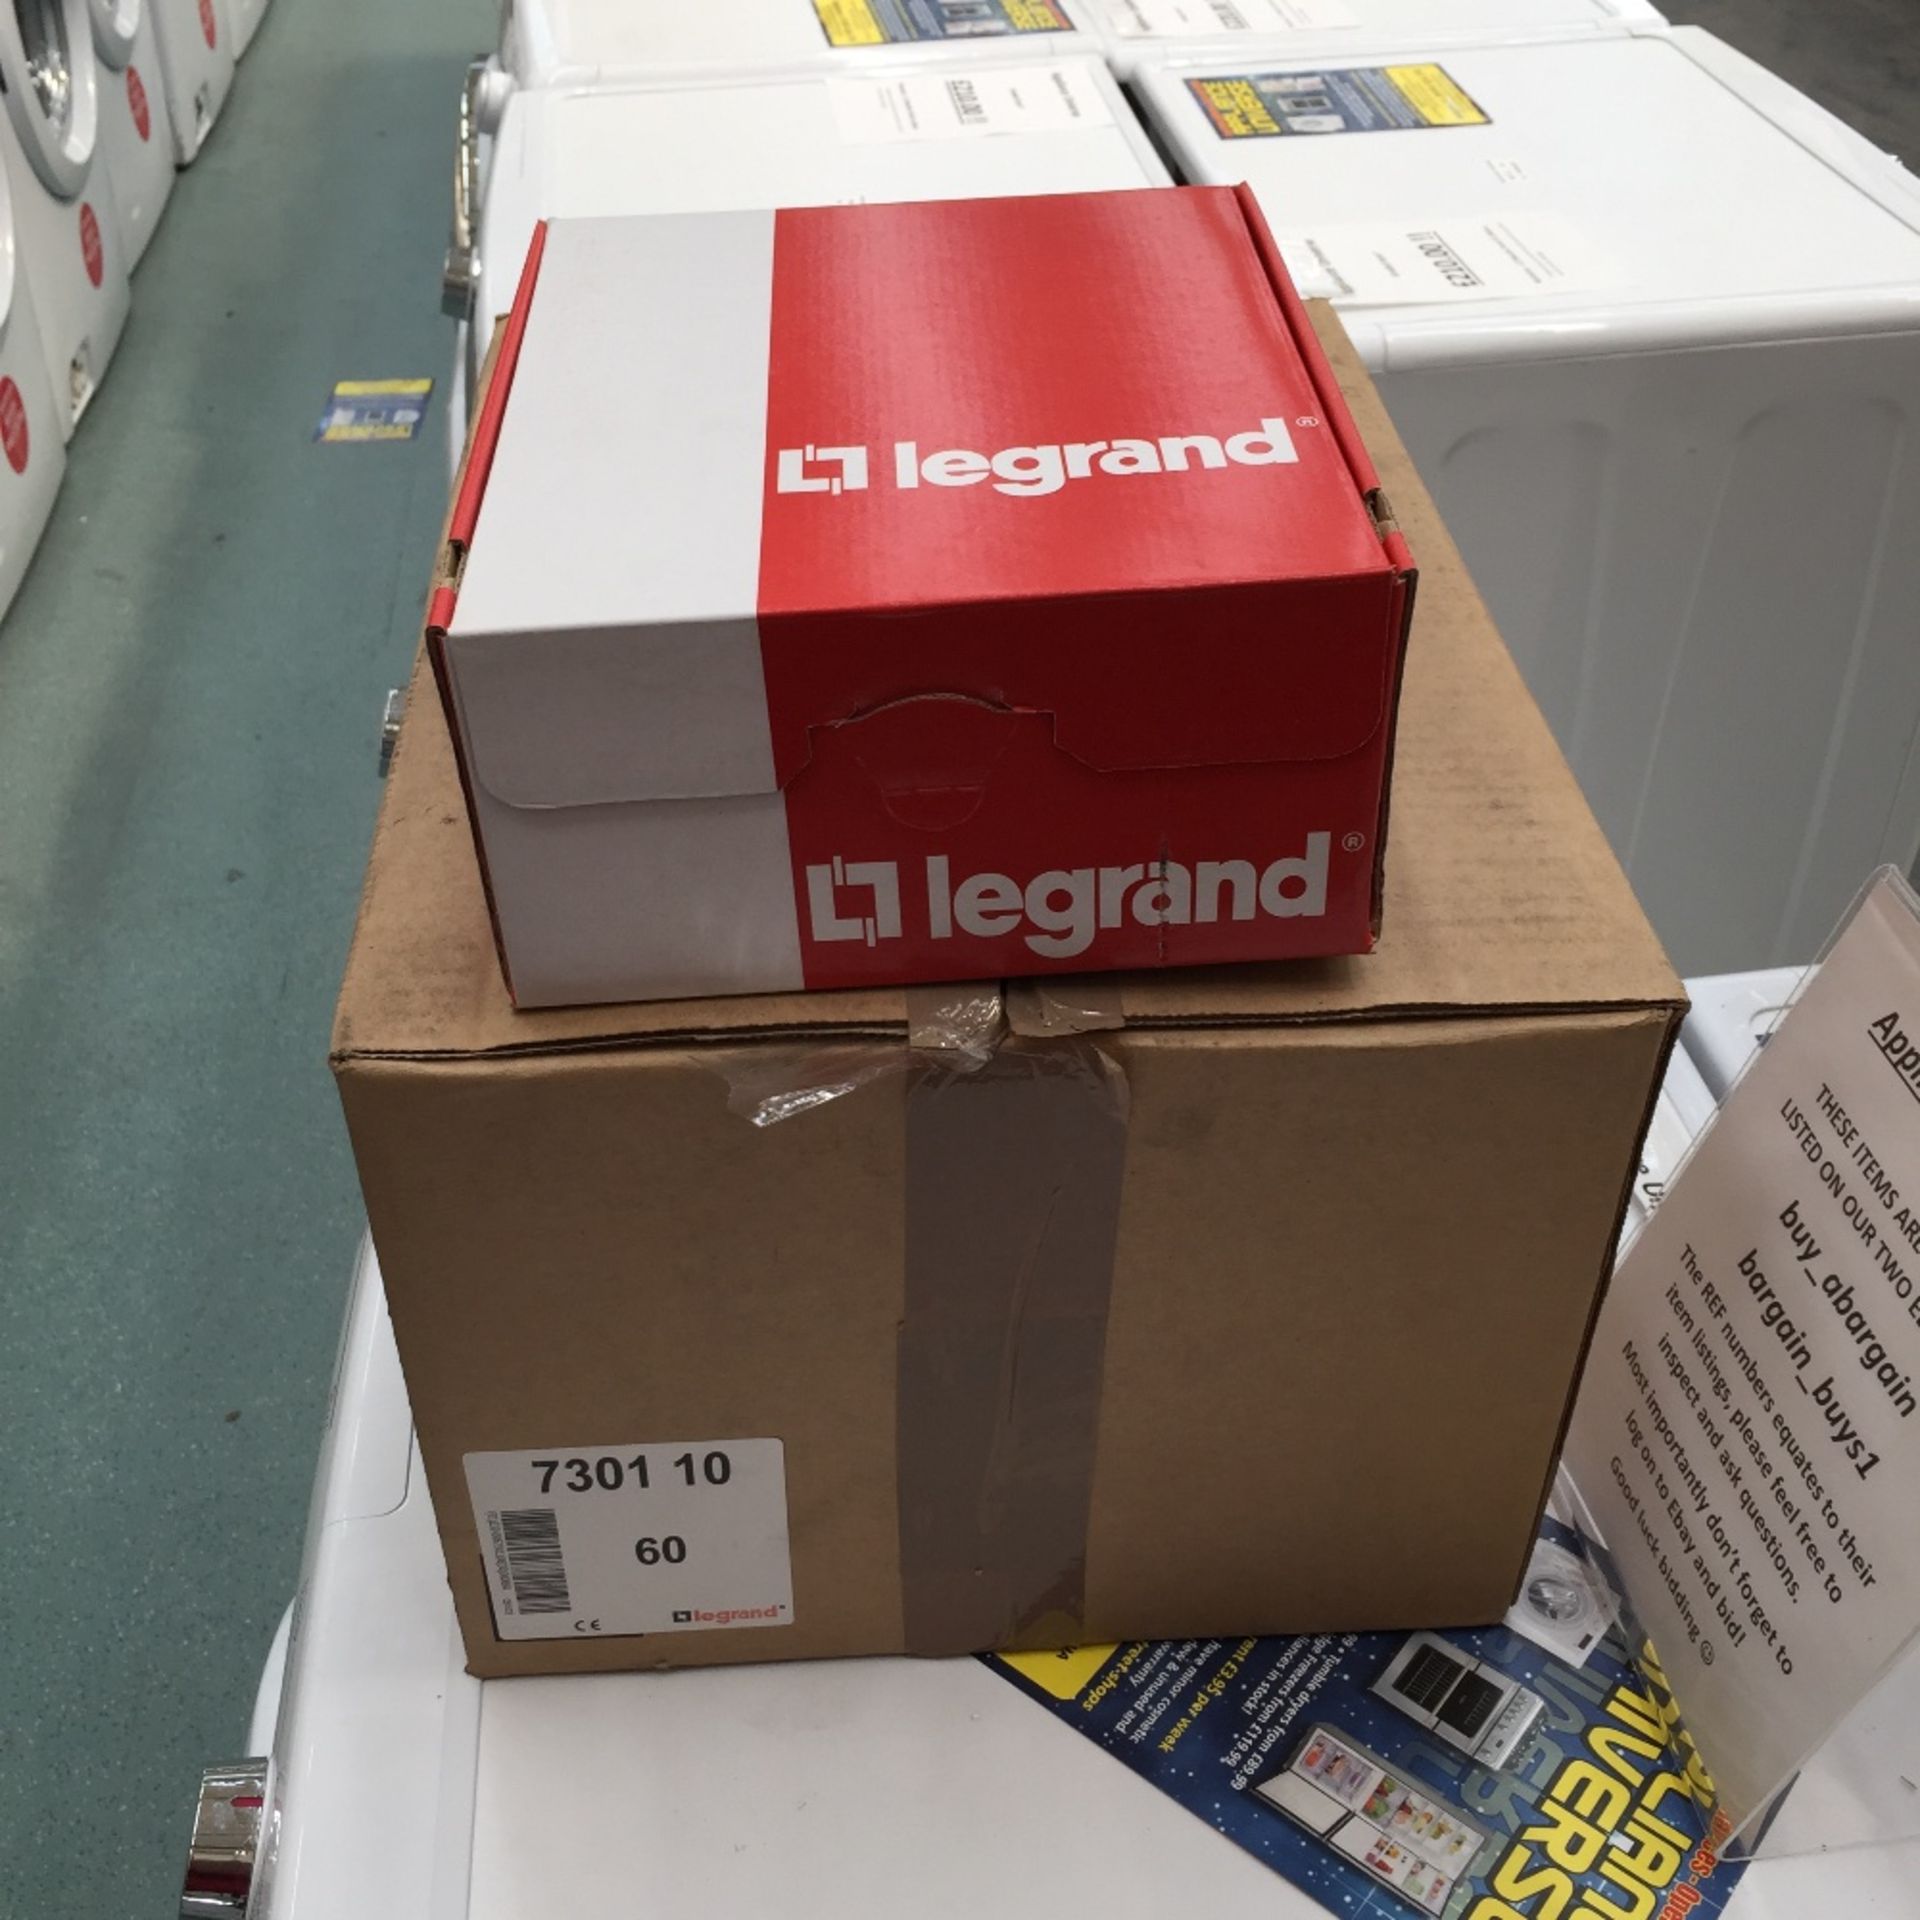 4 Boxes x 60 Legrand 20A DP Switch Marked Water Heater - Image 3 of 3